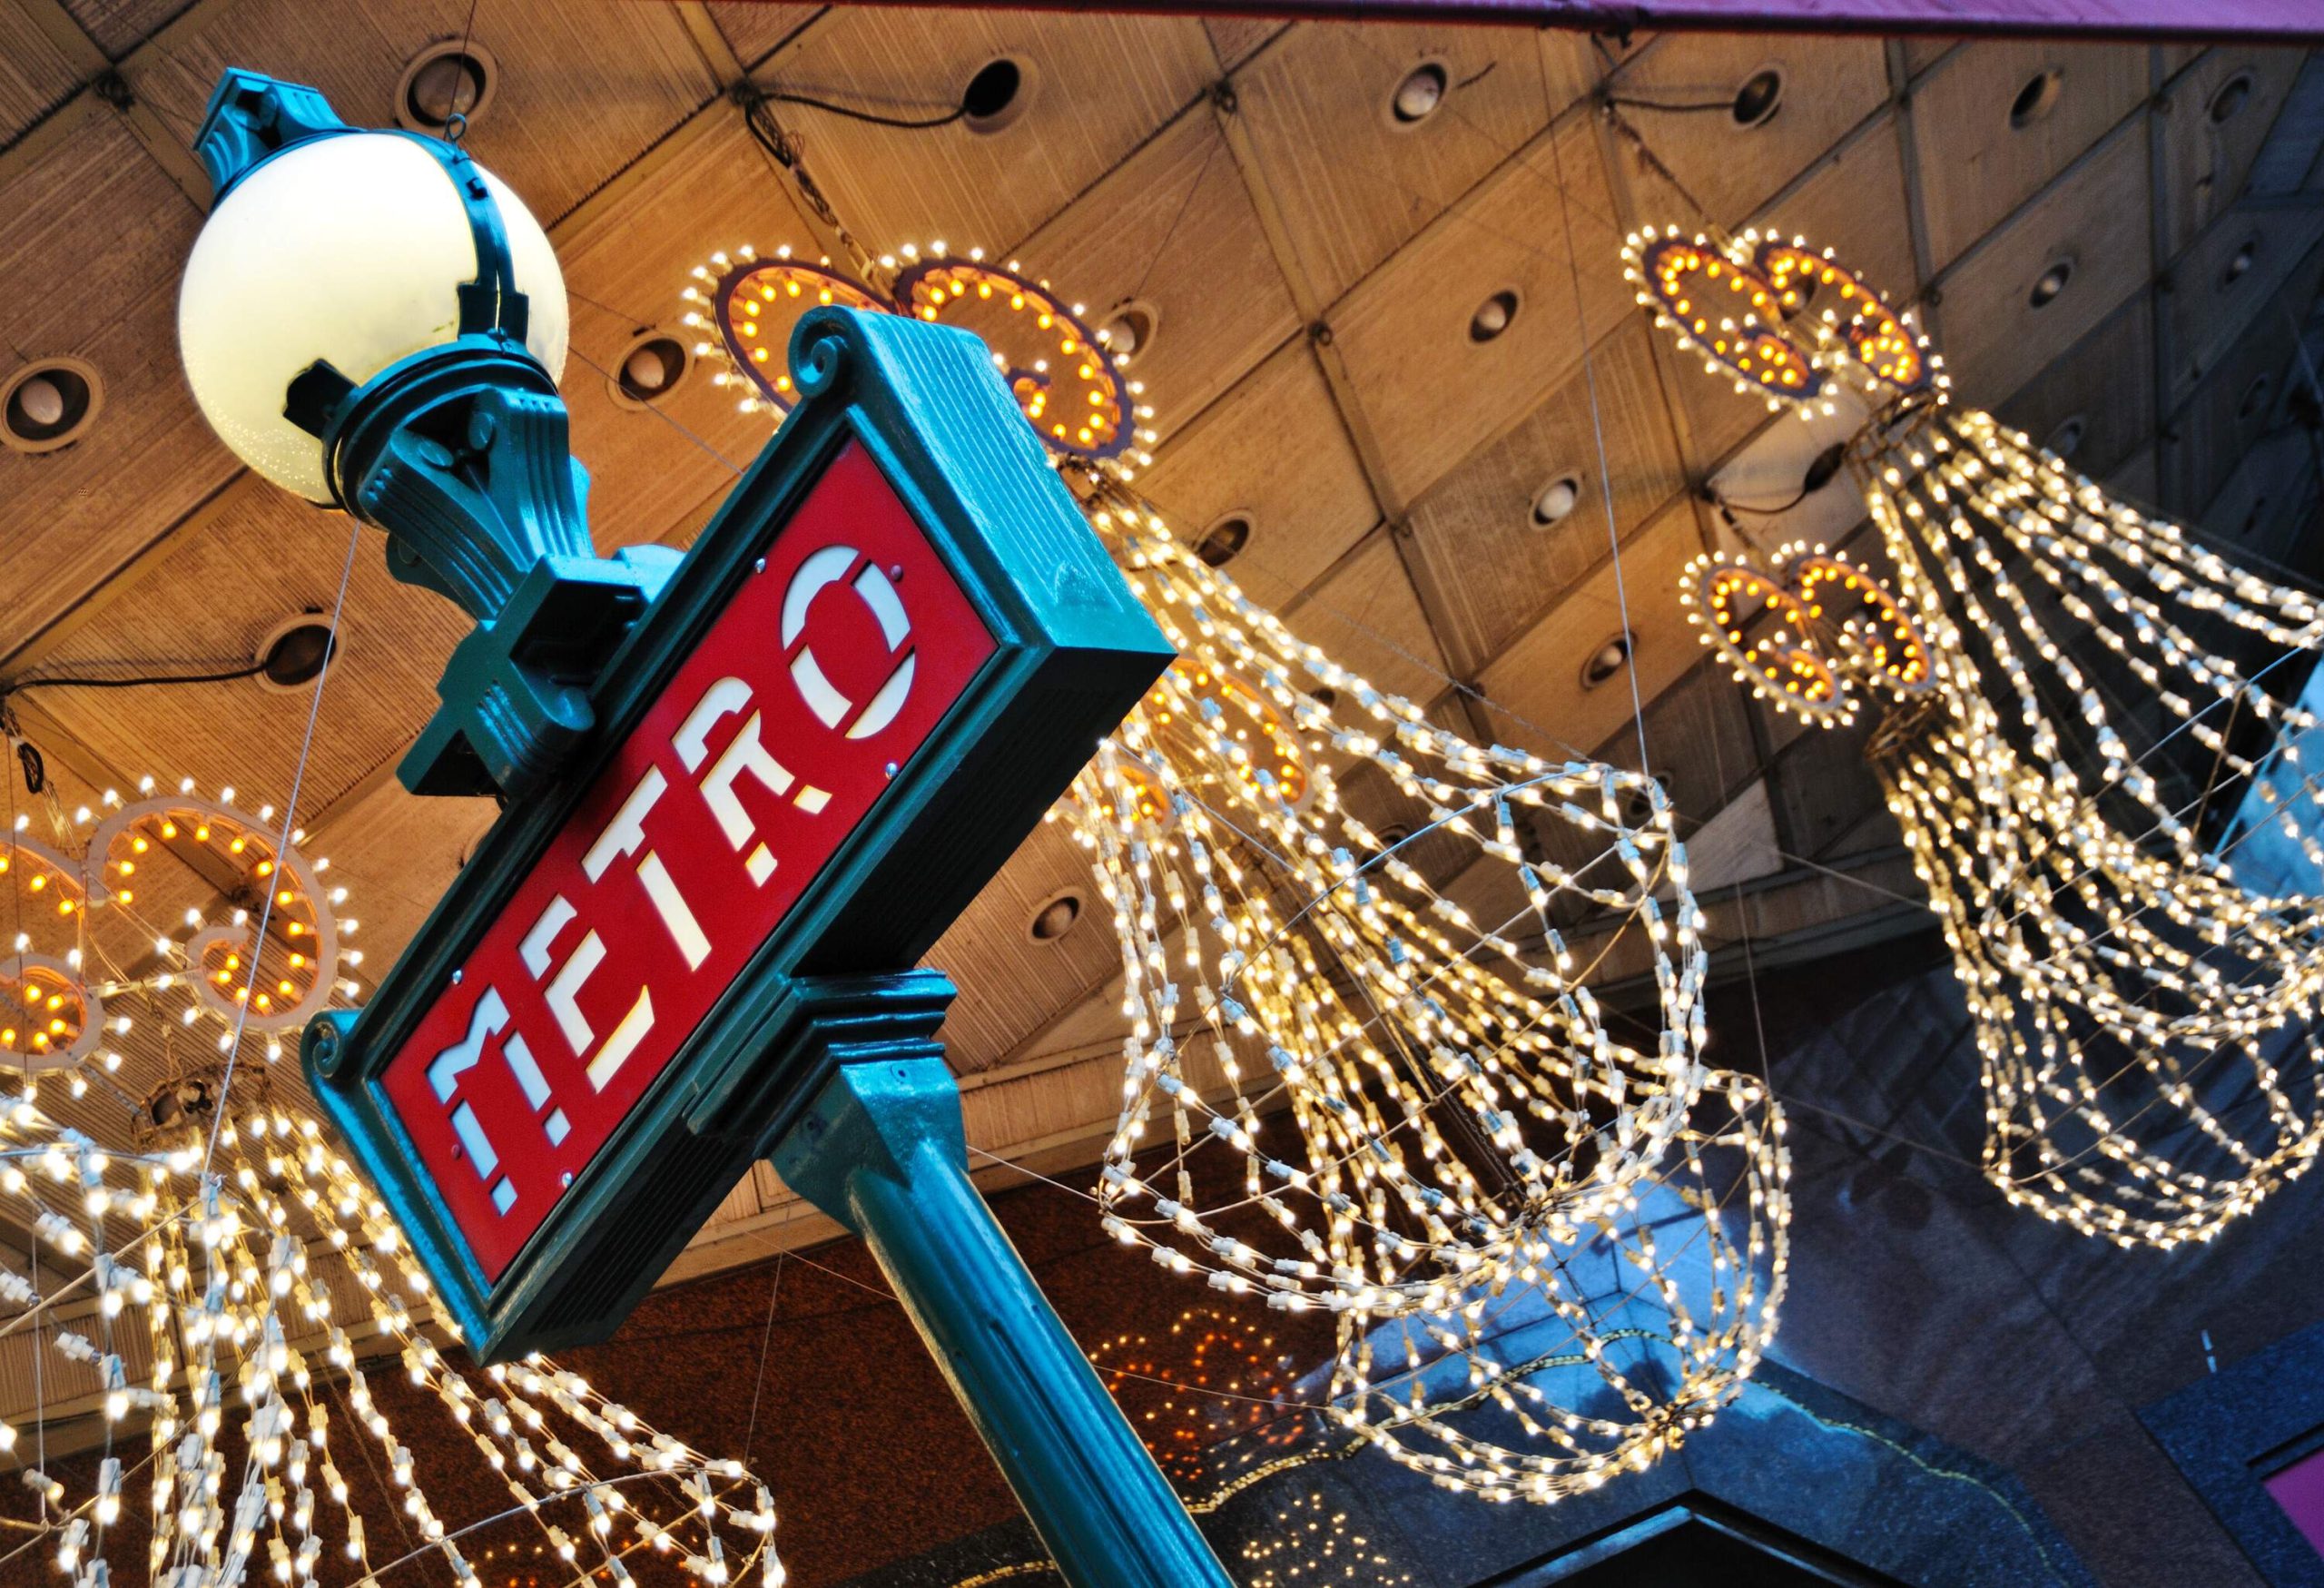 A red metro sign with light ornaments hanging from the ceiling.